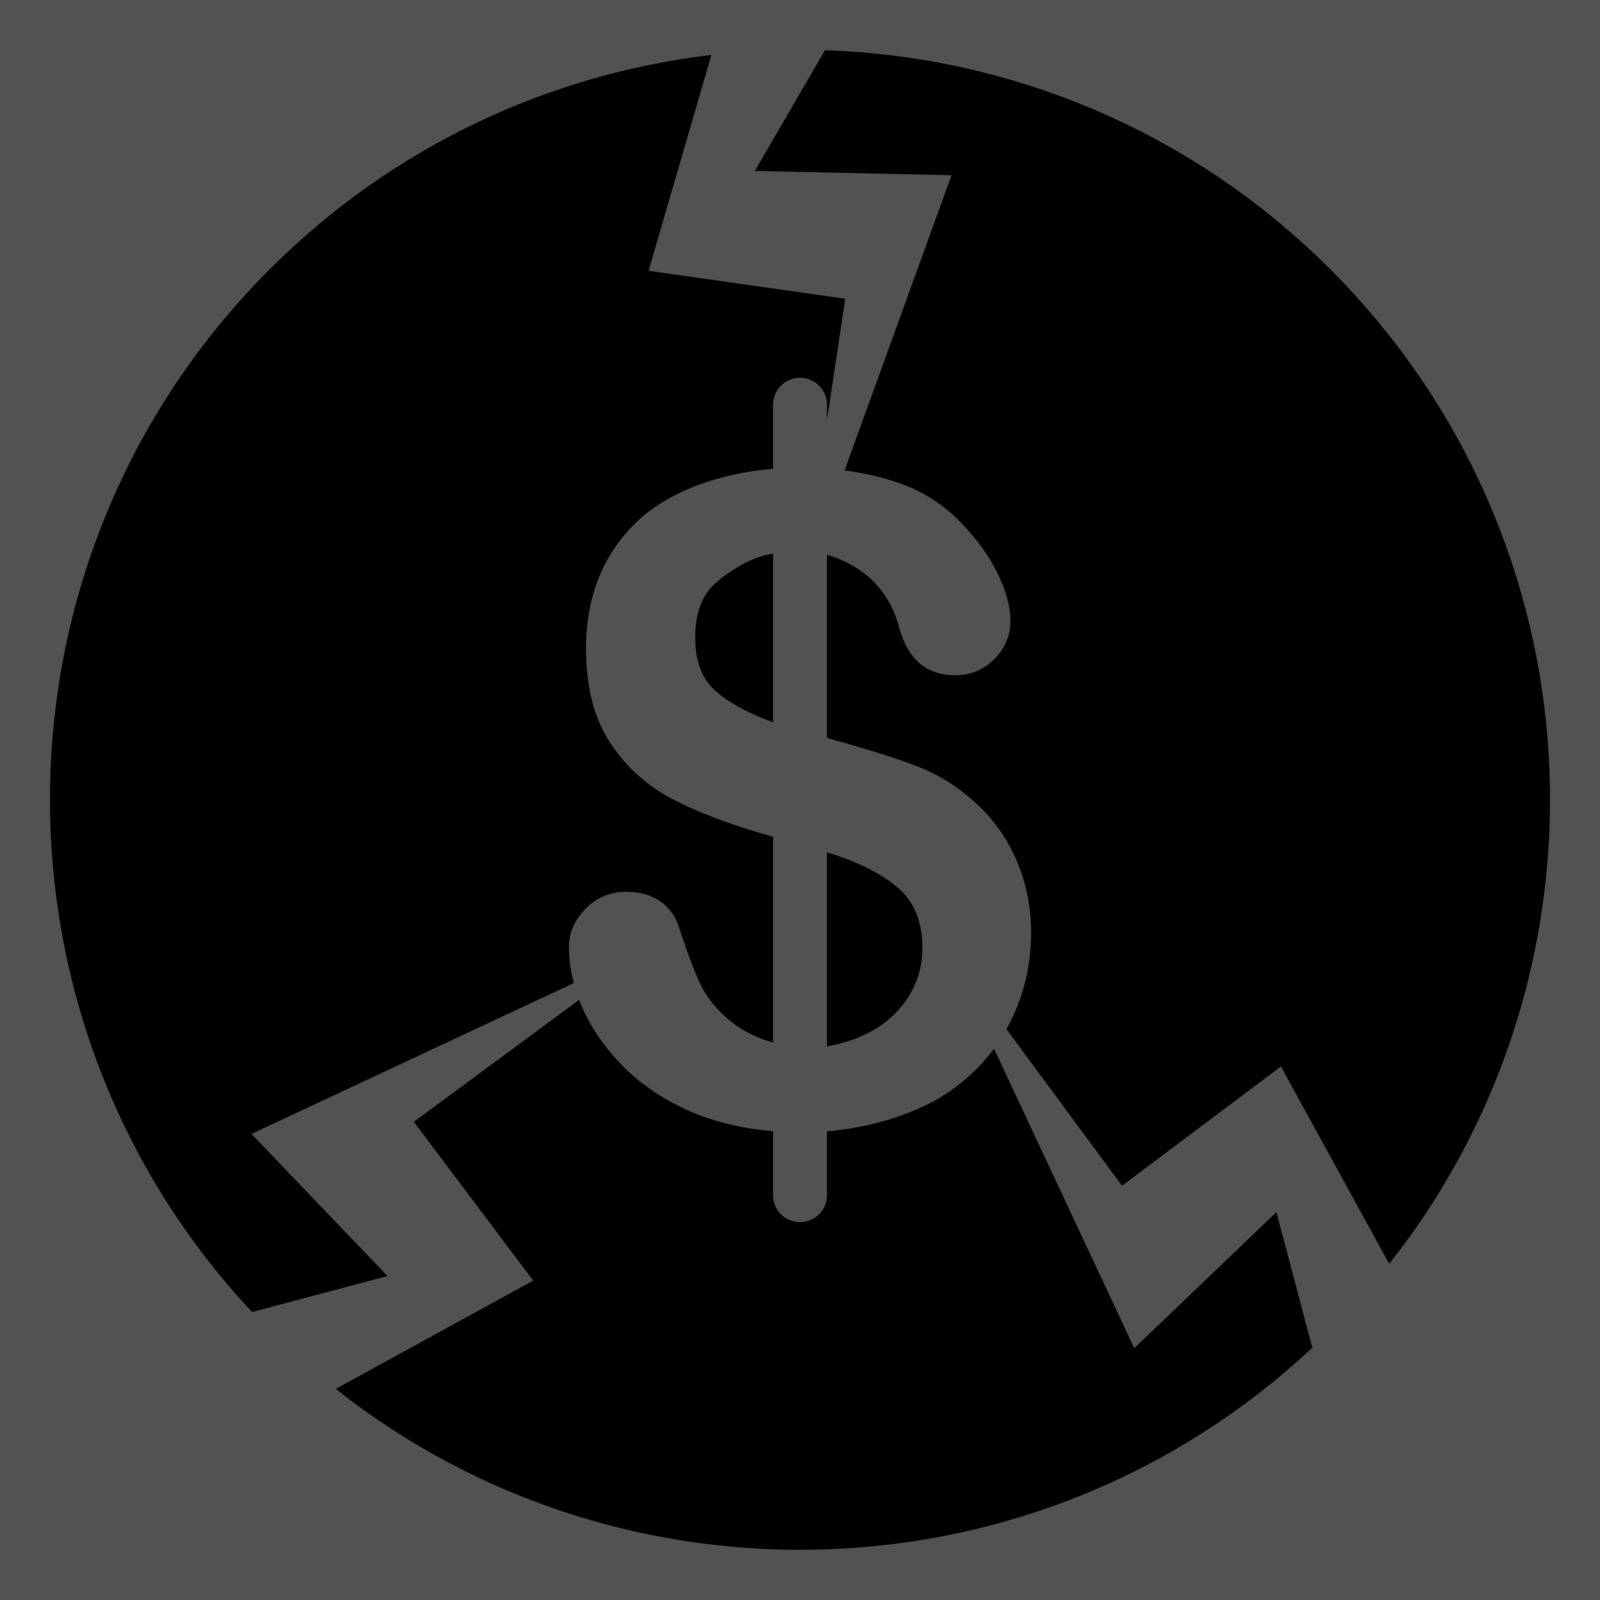 Financial Crash icon from Commerce Set. Vector style is flat symbol, black color, rounded angles, gray background.